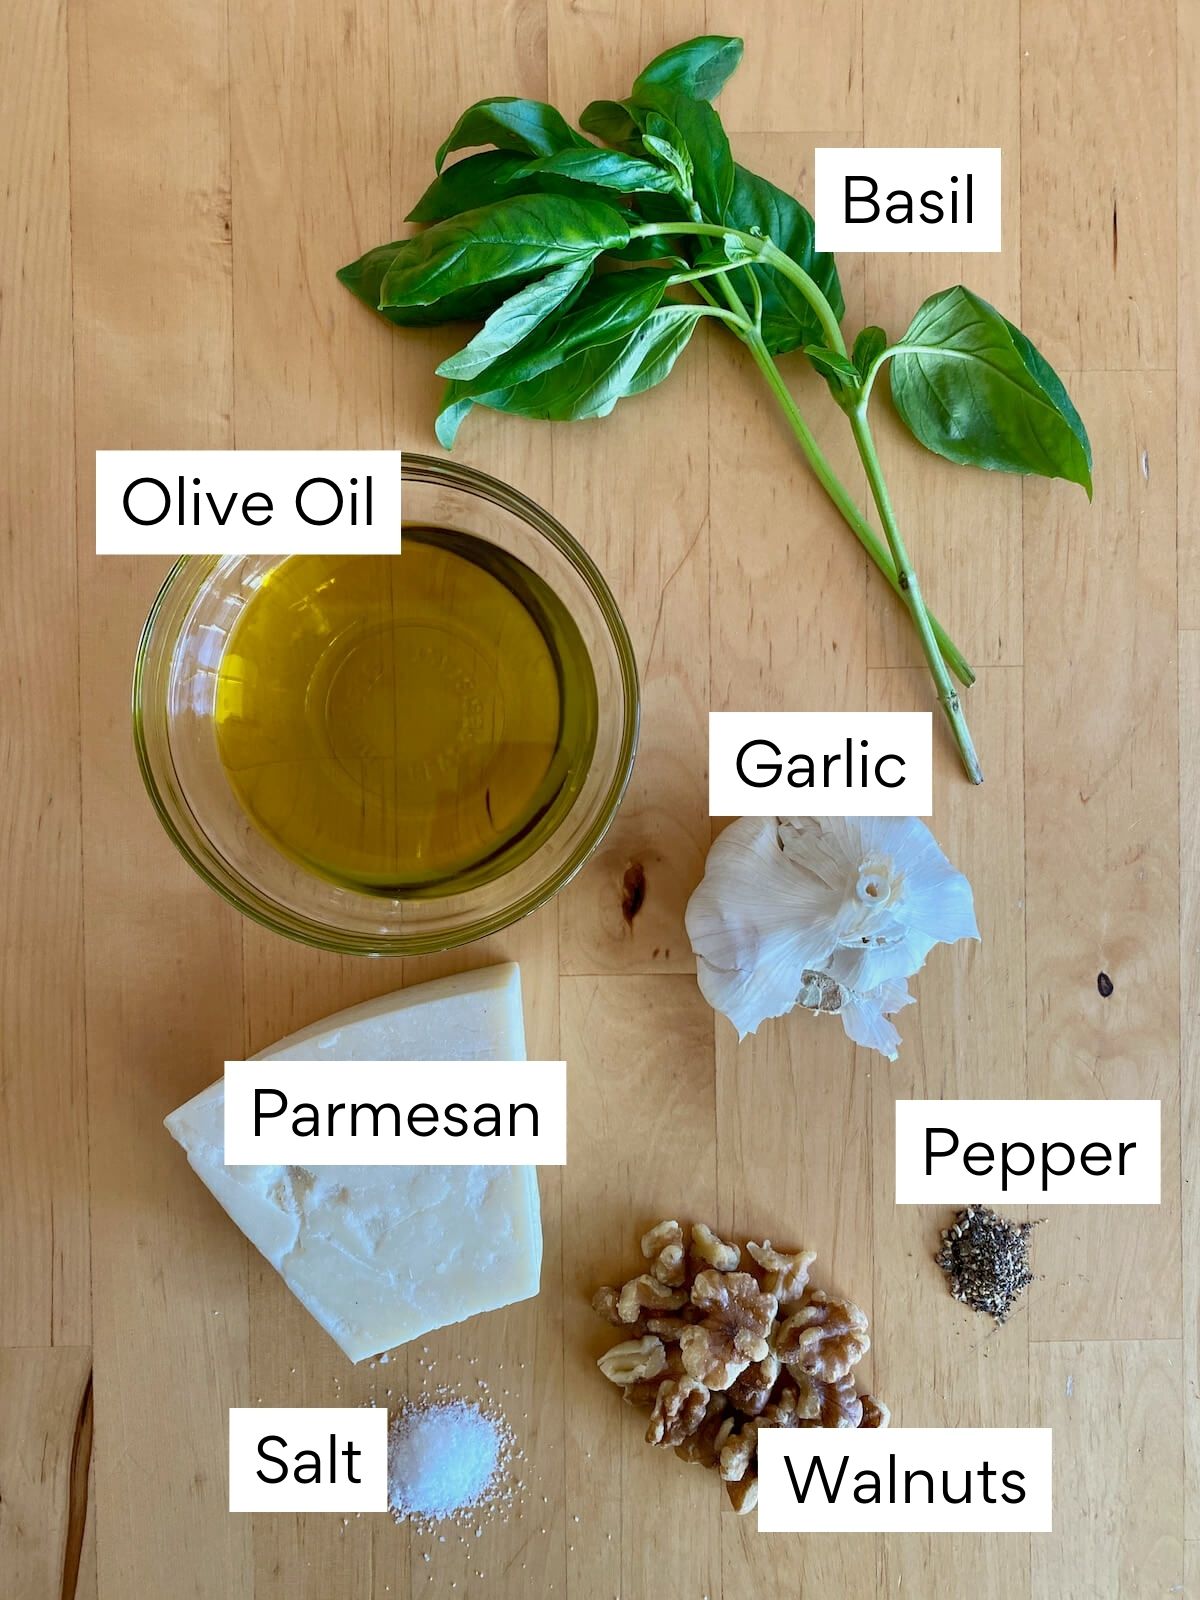 The ingredients to make pesto without pine nuts. Each ingredient is labeled with text. They include basil, olive oil, garlic, parmesan, walnuts, salt, and pepper.